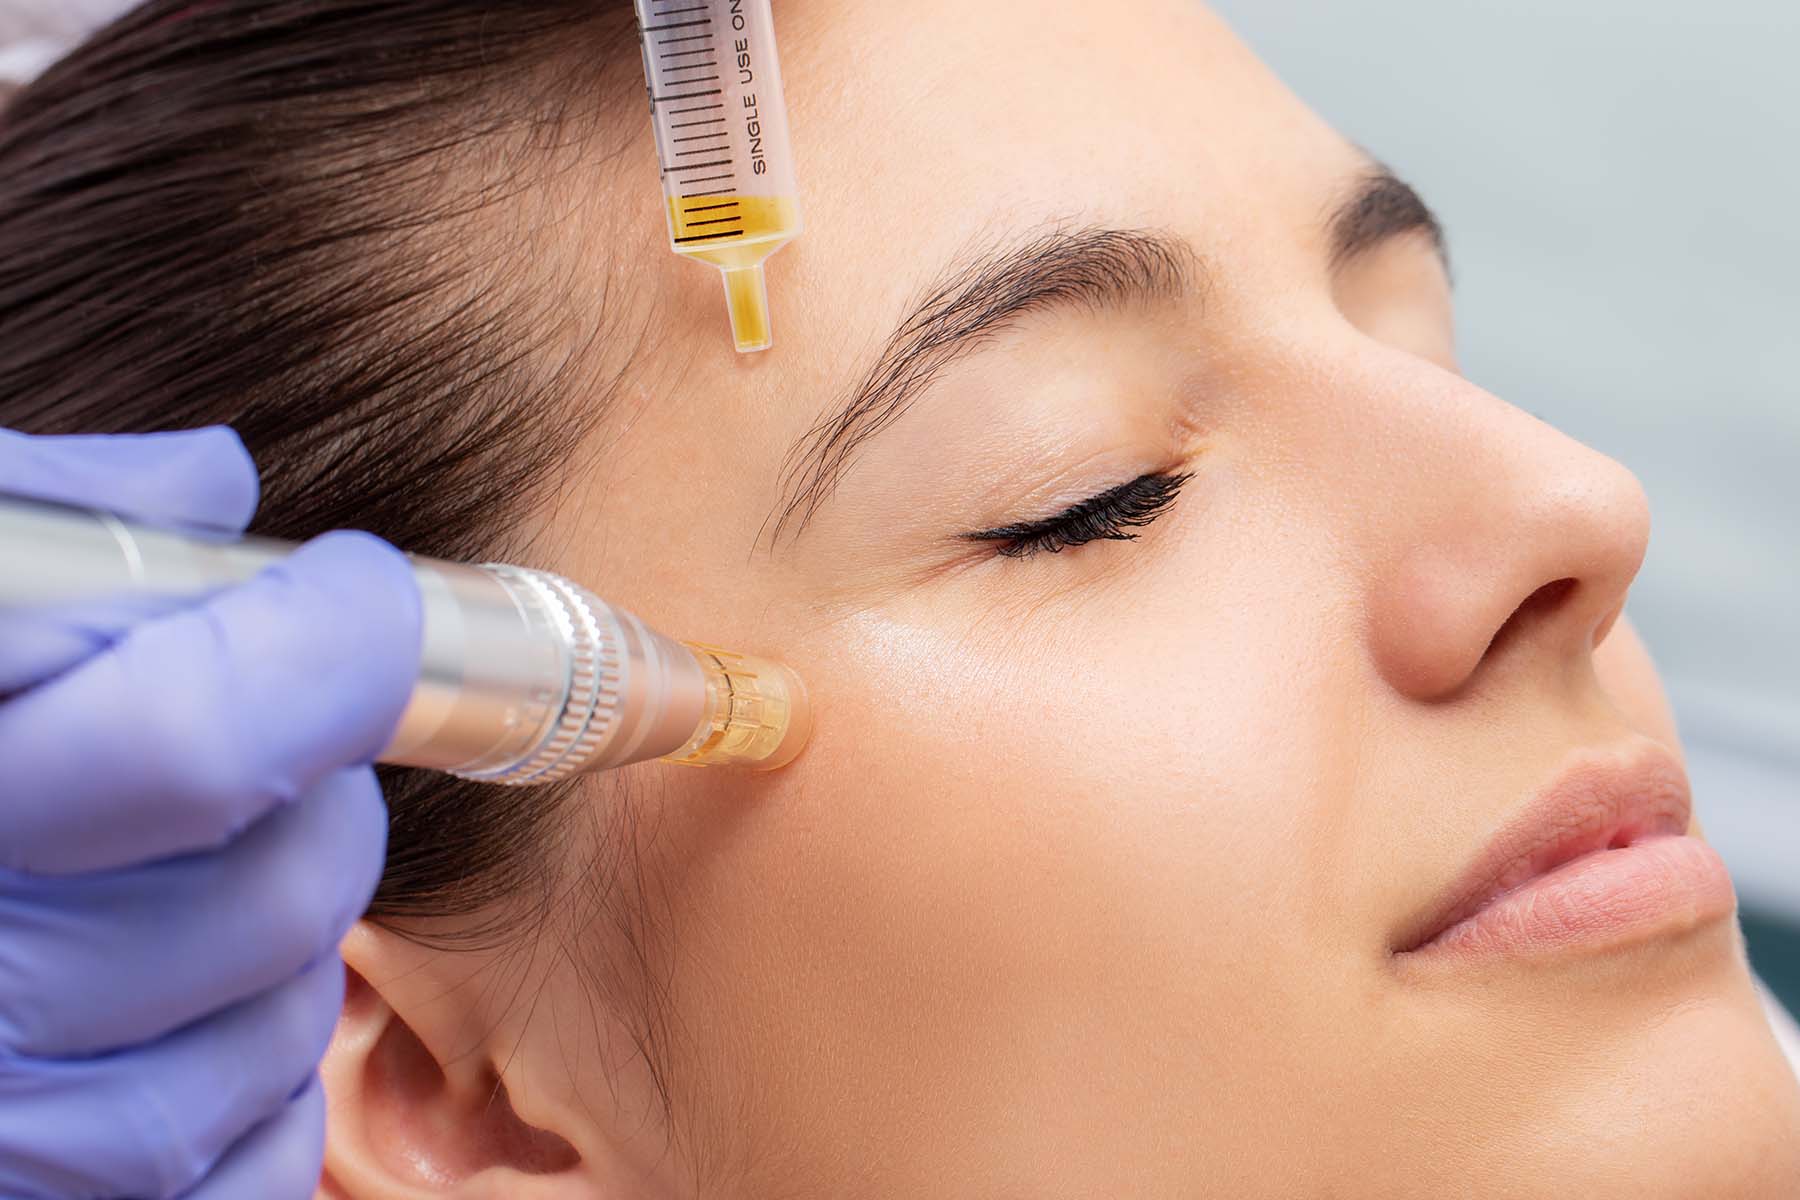 Close up shot of woman receiving microneedling treatment